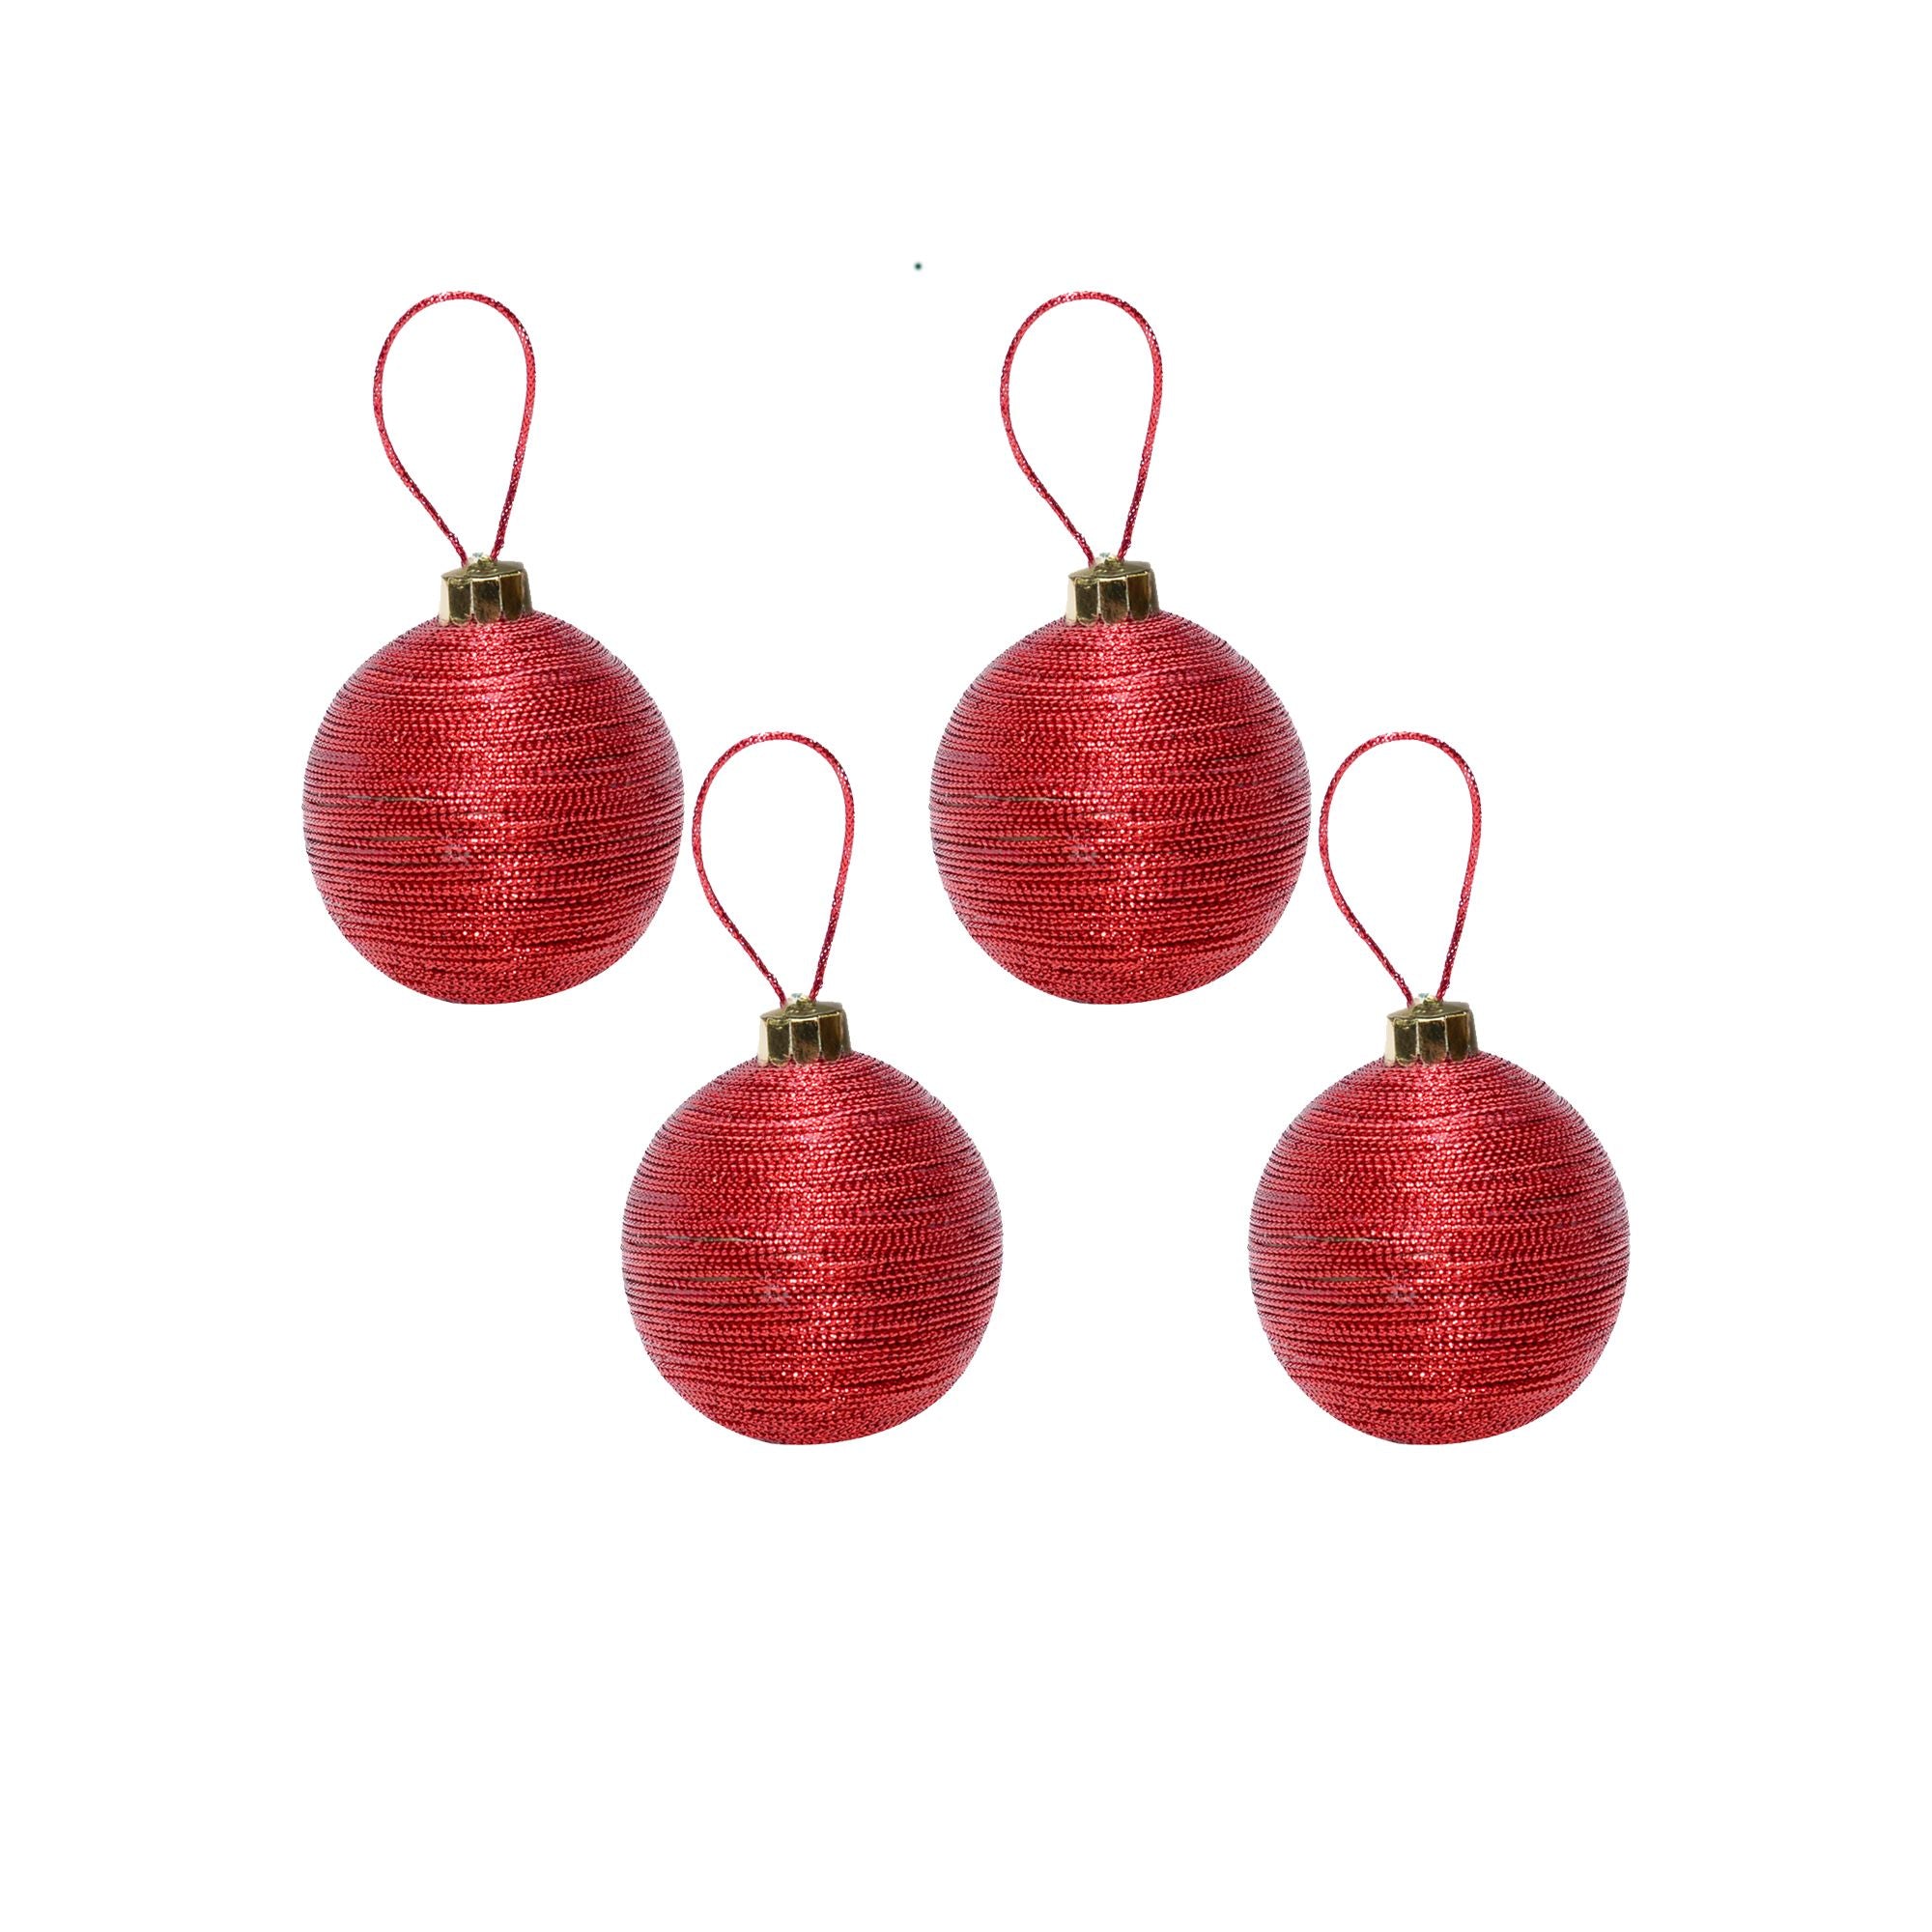 Handmade Christmas Ornaments - Lurex Baubles, 50mm, Red, 4pc